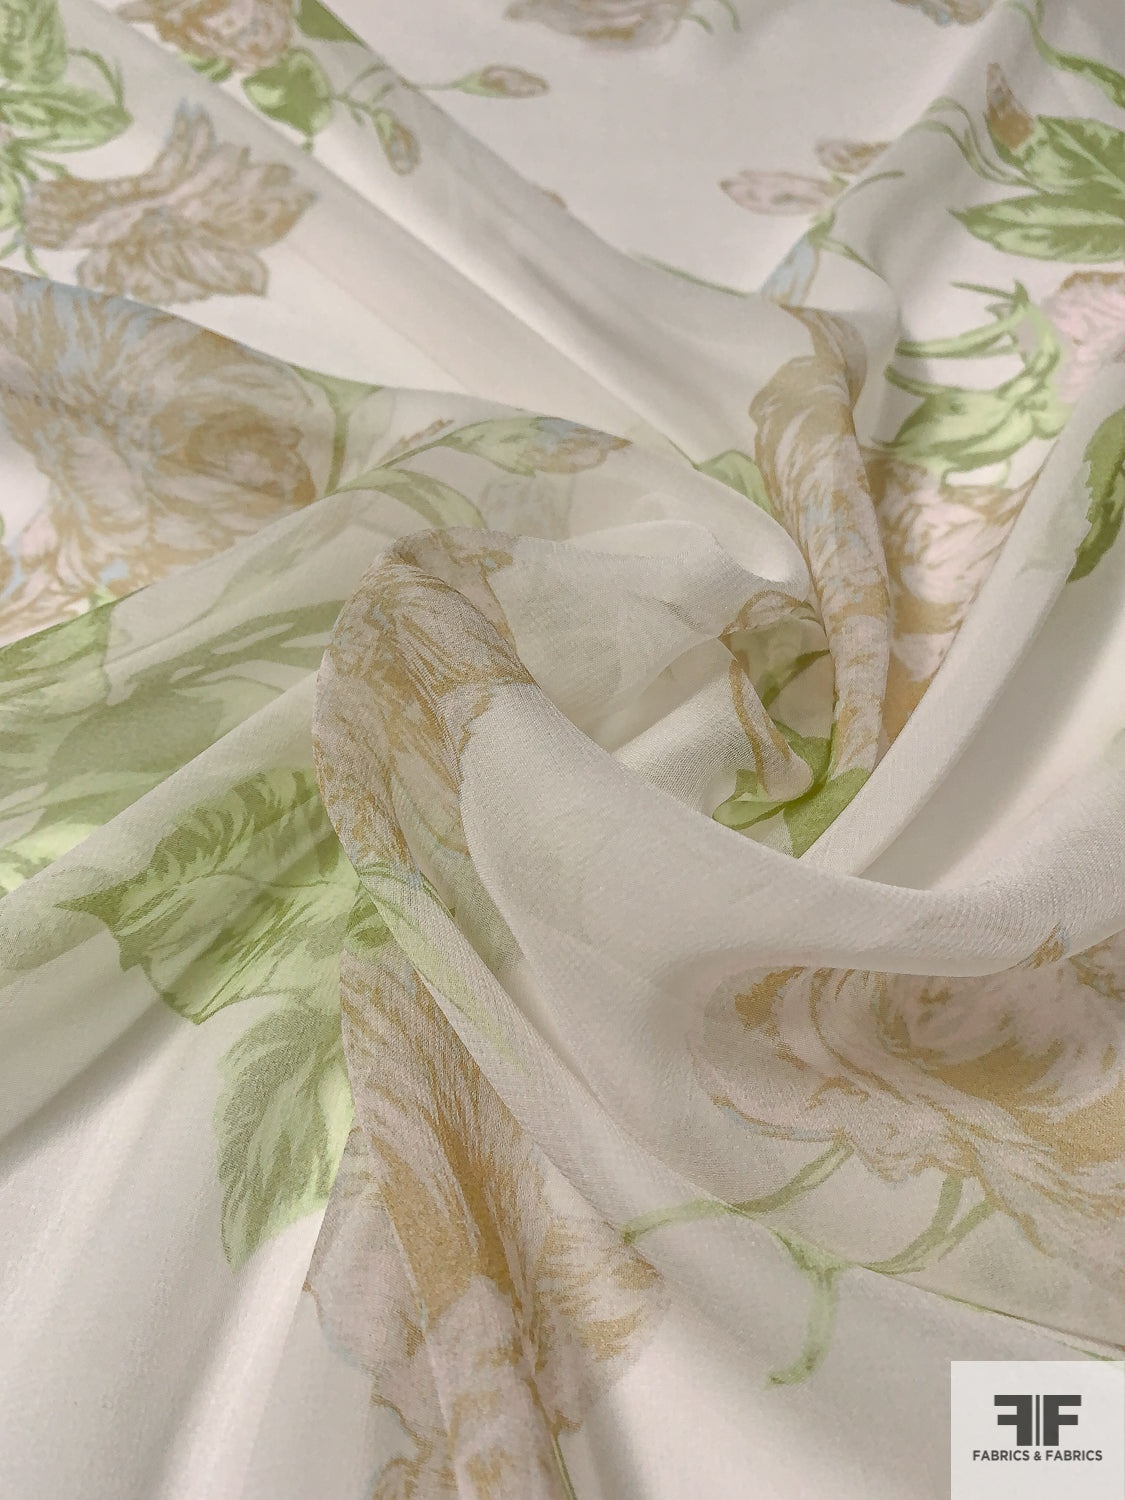 Large-Scale Floral Bouquet Printed Silk Chiffon - Shades of Pink / Greens / Tan